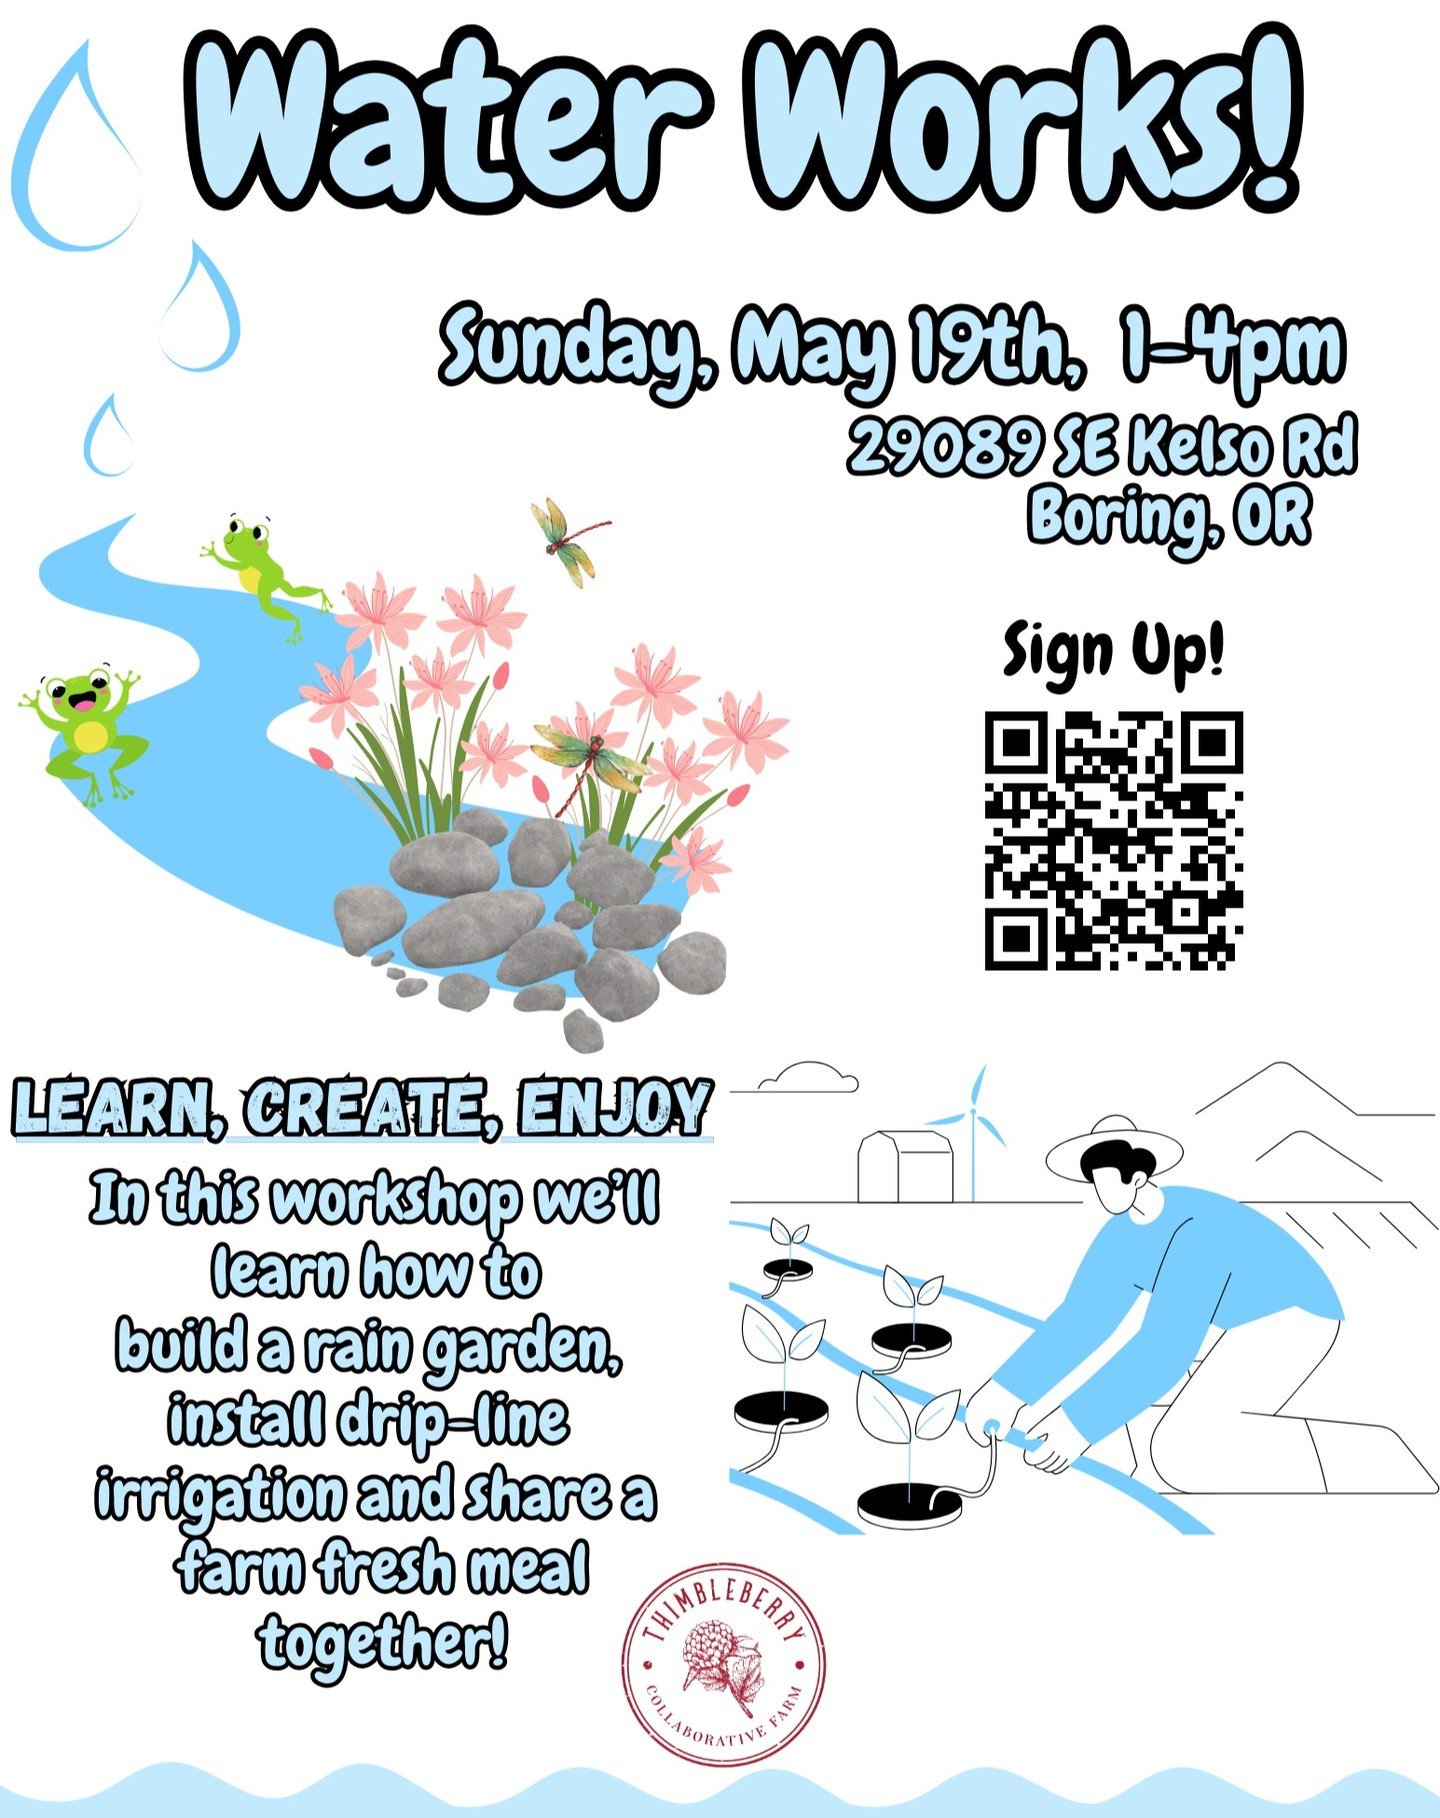 Join us on Sunday, May 19th, 1pm - 4pm, for a workshop called &ldquo;Water Works!&quot; In this workshop, we&rsquo;ll do a deep dive into how we can be water-wise in the dry and wet seasons. Through an exploration of rain gardens, berms, swales, drip